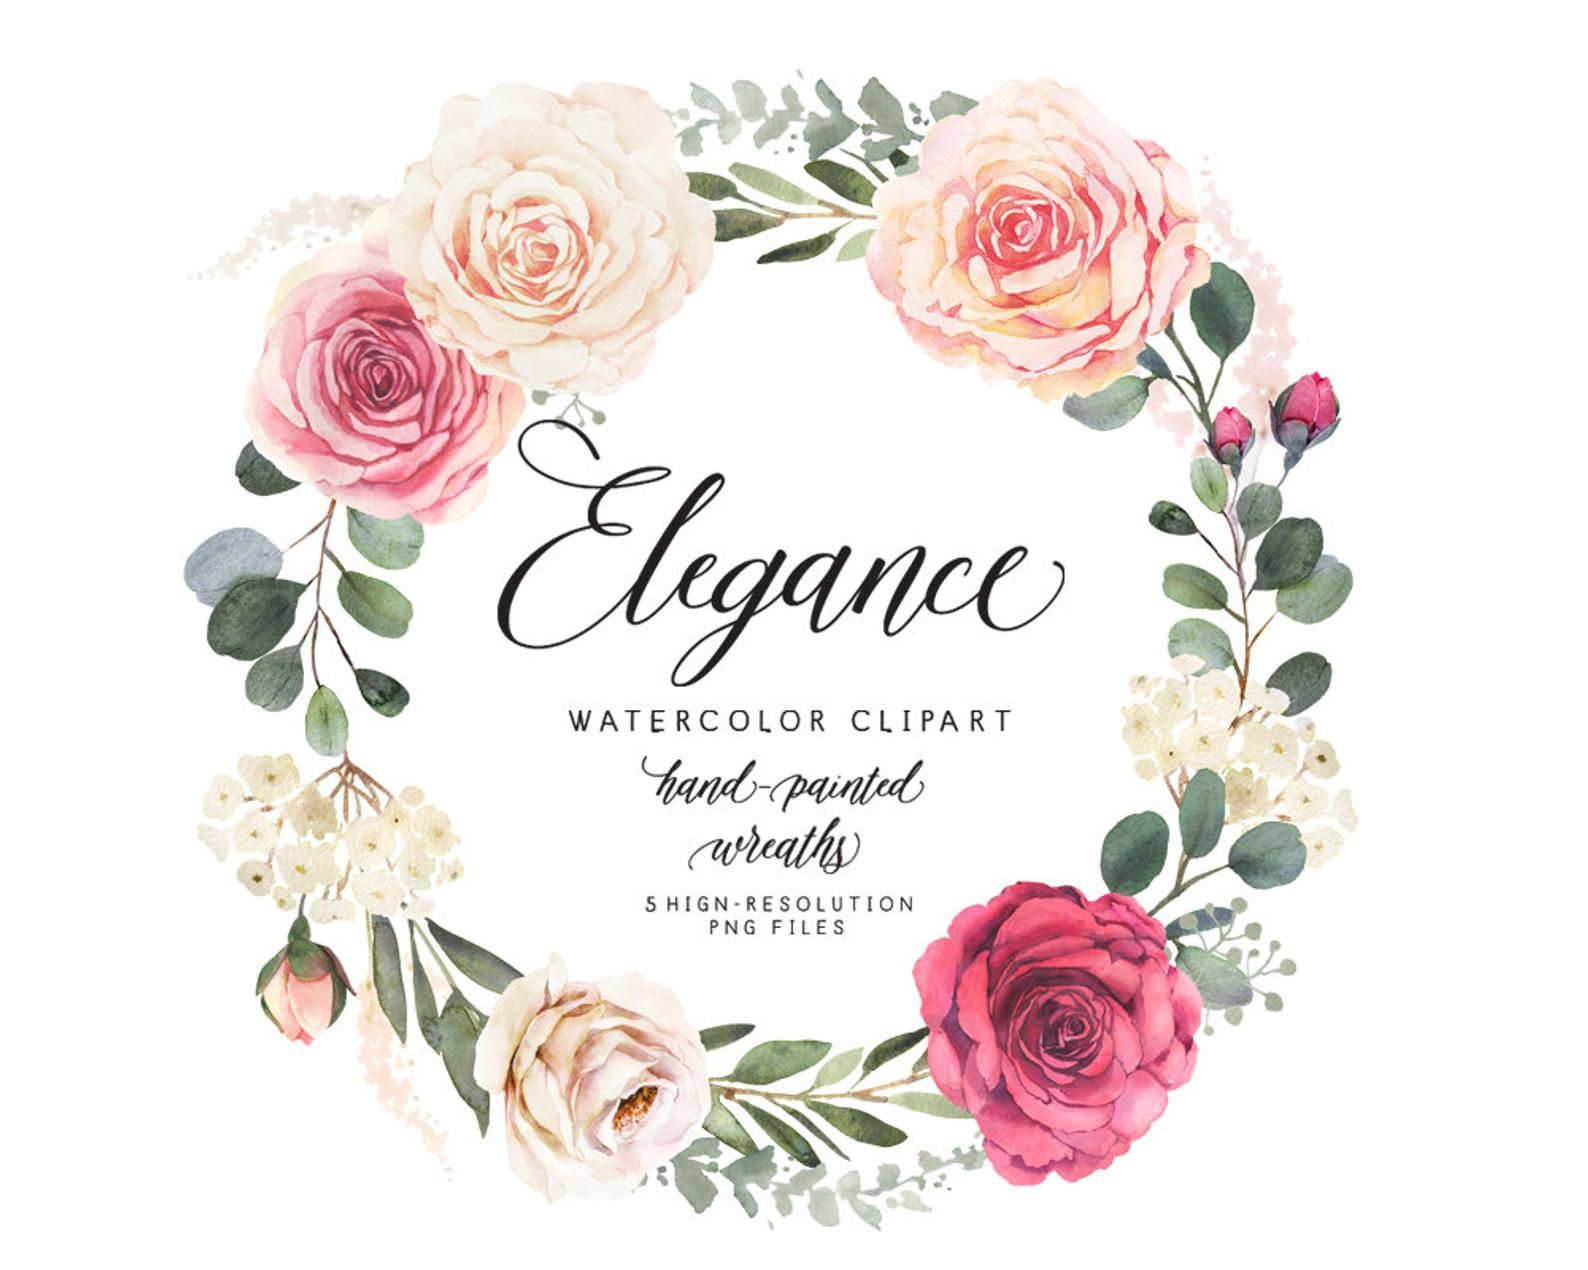 Elegant watercolor clipart with roses and eucalyptus.